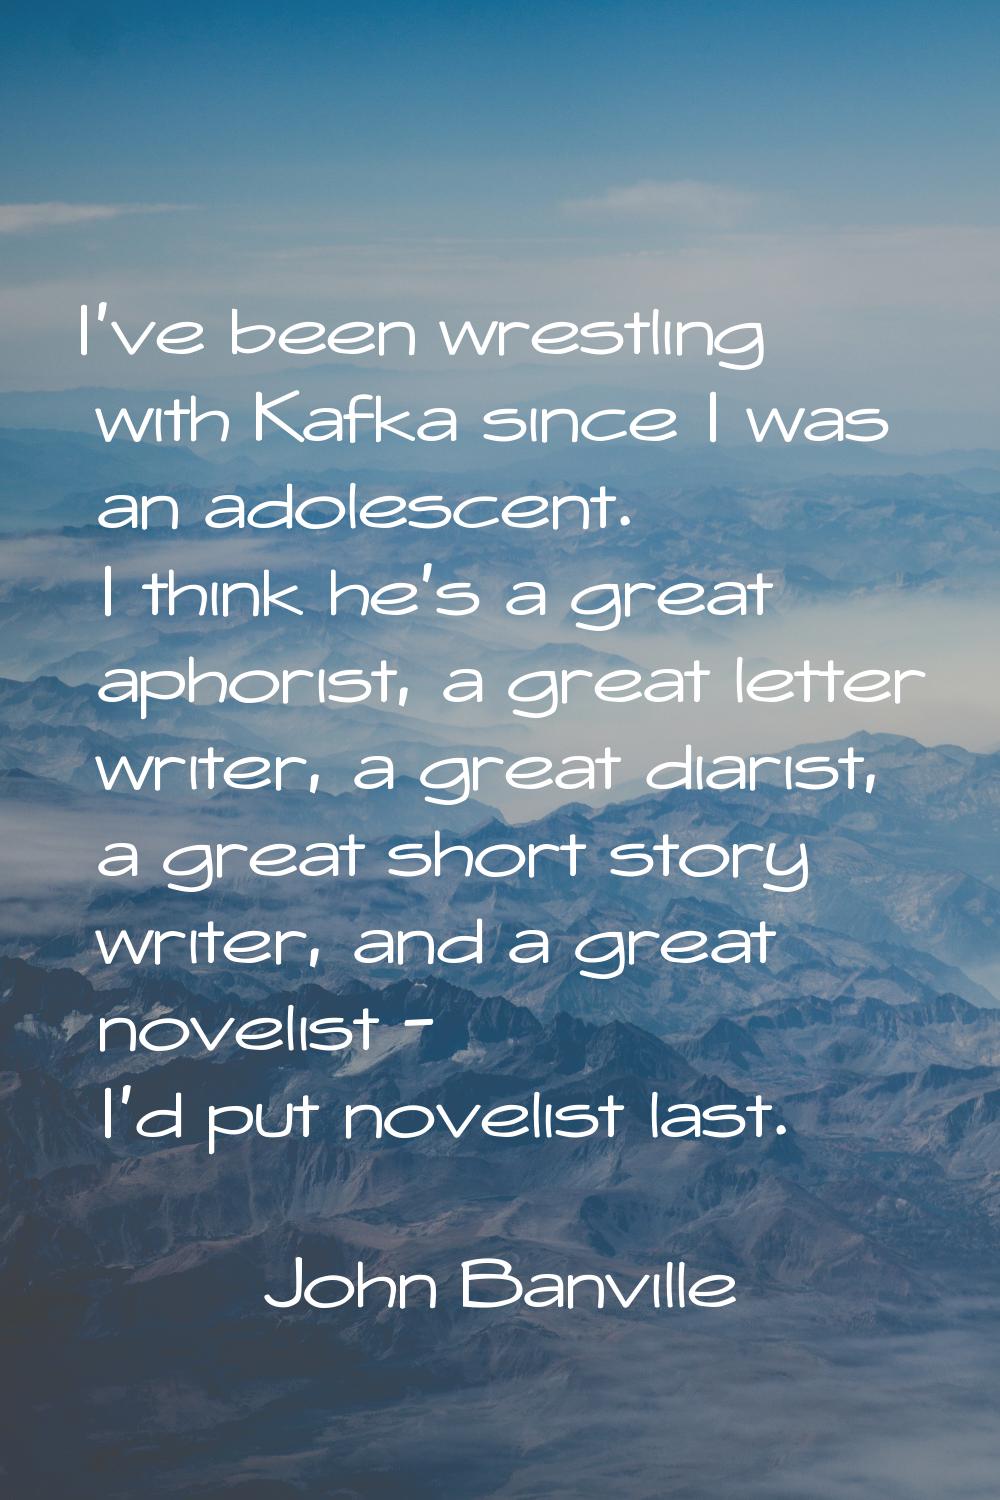 I've been wrestling with Kafka since I was an adolescent. I think he's a great aphorist, a great le